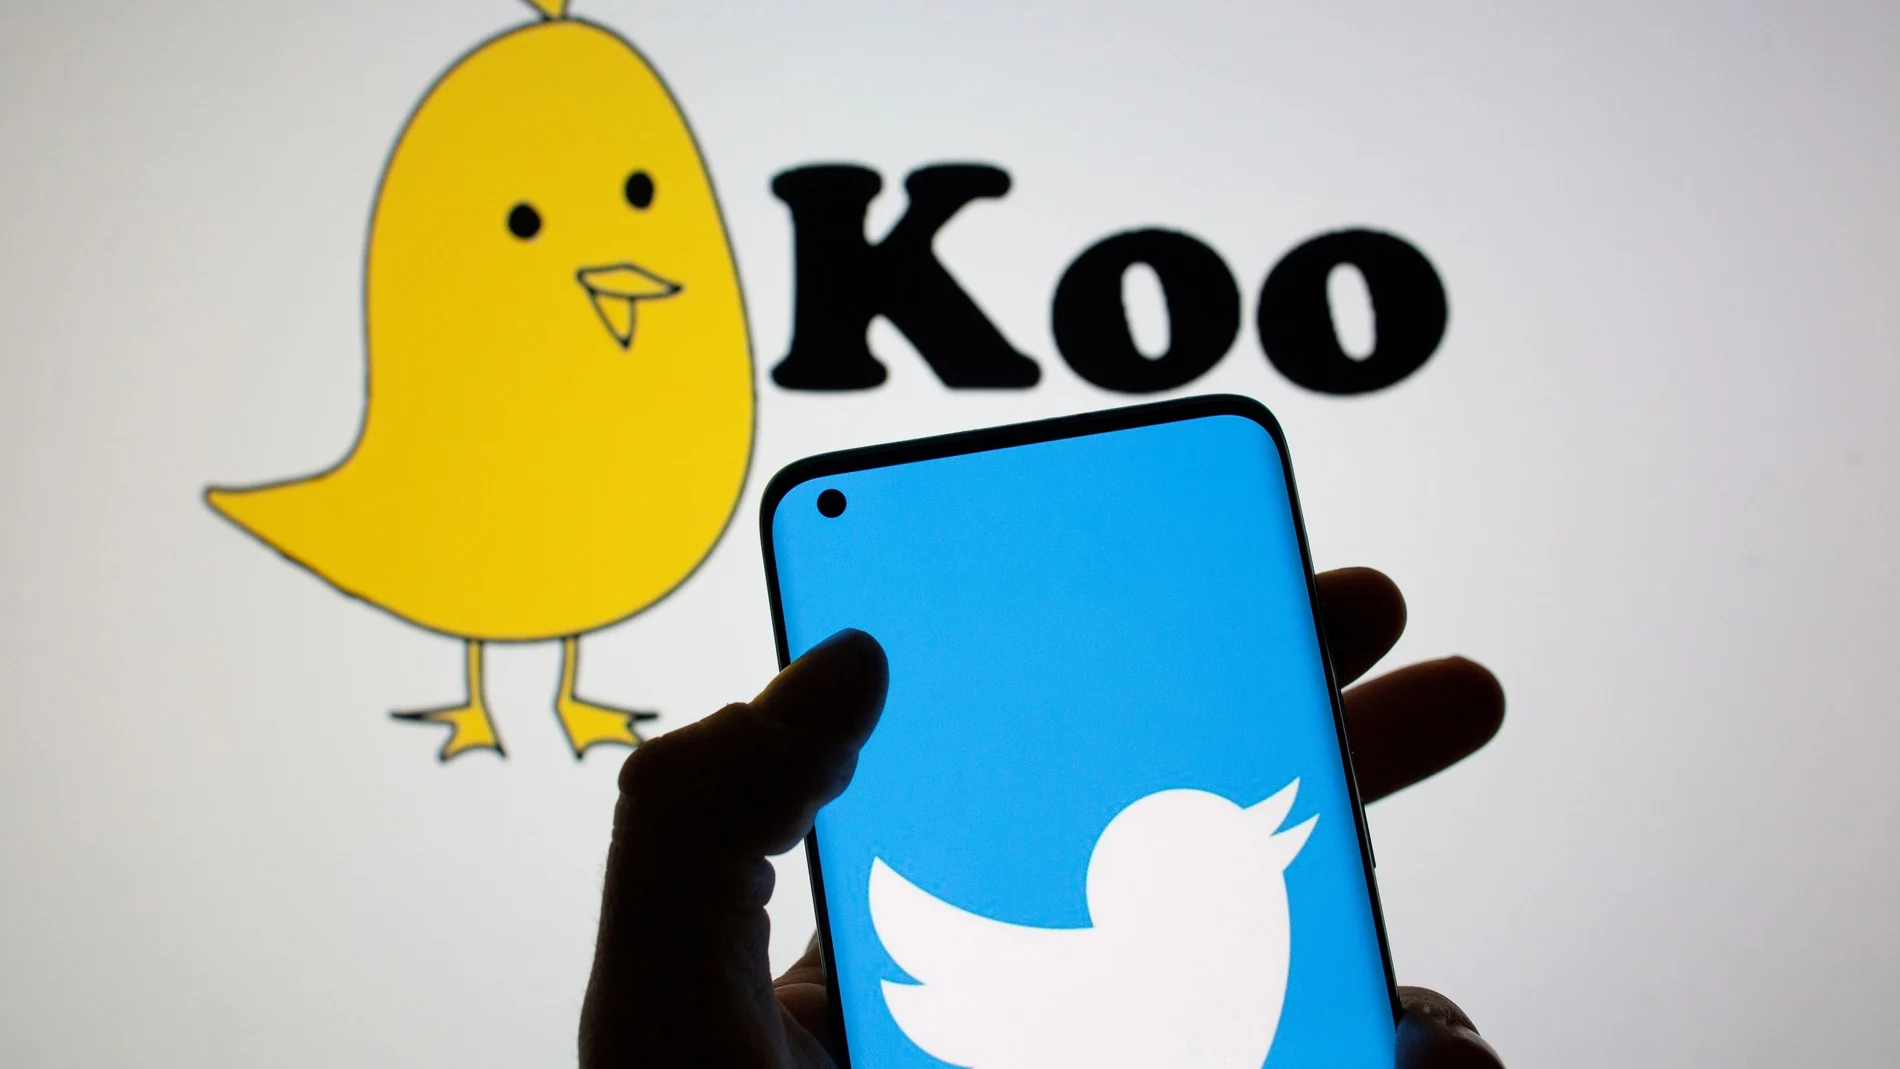 FILE PHOTO: Twitter logo is seen on smartphone in front of displayed Koo app logo in this illustration taken, February 10, 2021. REUTERS/Dado Ruvic/Illustration/File Photo